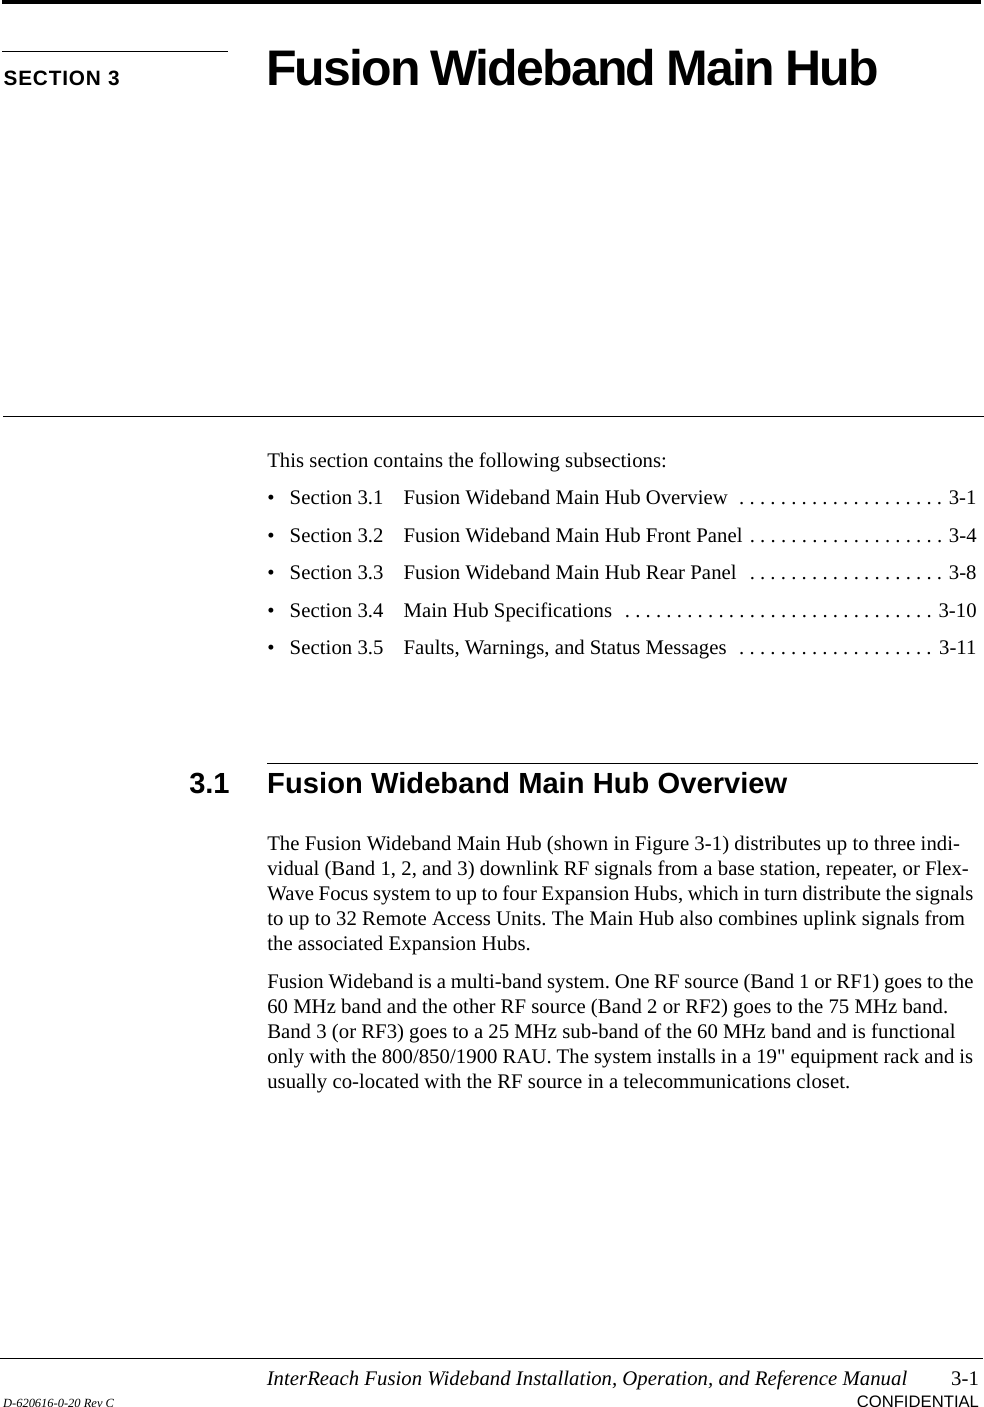 InterReach Fusion Wideband Installation, Operation, and Reference Manual 3-1D-620616-0-20 Rev C CONFIDENTIALSECTION 3 Fusion Wideband Main HubThis section contains the following subsections:• Section 3.1   Fusion Wideband Main Hub Overview  . . . . . . . . . . . . . . . . . . . . 3-1• Section 3.2   Fusion Wideband Main Hub Front Panel . . . . . . . . . . . . . . . . . . . 3-4• Section 3.3   Fusion Wideband Main Hub Rear Panel  . . . . . . . . . . . . . . . . . . . 3-8• Section 3.4   Main Hub Specifications  . . . . . . . . . . . . . . . . . . . . . . . . . . . . . . 3-10• Section 3.5   Faults, Warnings, and Status Messages  . . . . . . . . . . . . . . . . . . . 3-113.1 Fusion Wideband Main Hub OverviewThe Fusion Wideband Main Hub (shown in Figure 3-1) distributes up to three indi-vidual (Band 1, 2, and 3) downlink RF signals from a base station, repeater, or Flex-Wave Focus system to up to four Expansion Hubs, which in turn distribute the signals to up to 32 Remote Access Units. The Main Hub also combines uplink signals from the associated Expansion Hubs.Fusion Wideband is a multi-band system. One RF source (Band 1 or RF1) goes to the 60 MHz band and the other RF source (Band 2 or RF2) goes to the 75 MHz band. Band 3 (or RF3) goes to a 25 MHz sub-band of the 60 MHz band and is functional only with the 800/850/1900 RAU. The system installs in a 19&quot; equipment rack and is usually co-located with the RF source in a telecommunications closet.